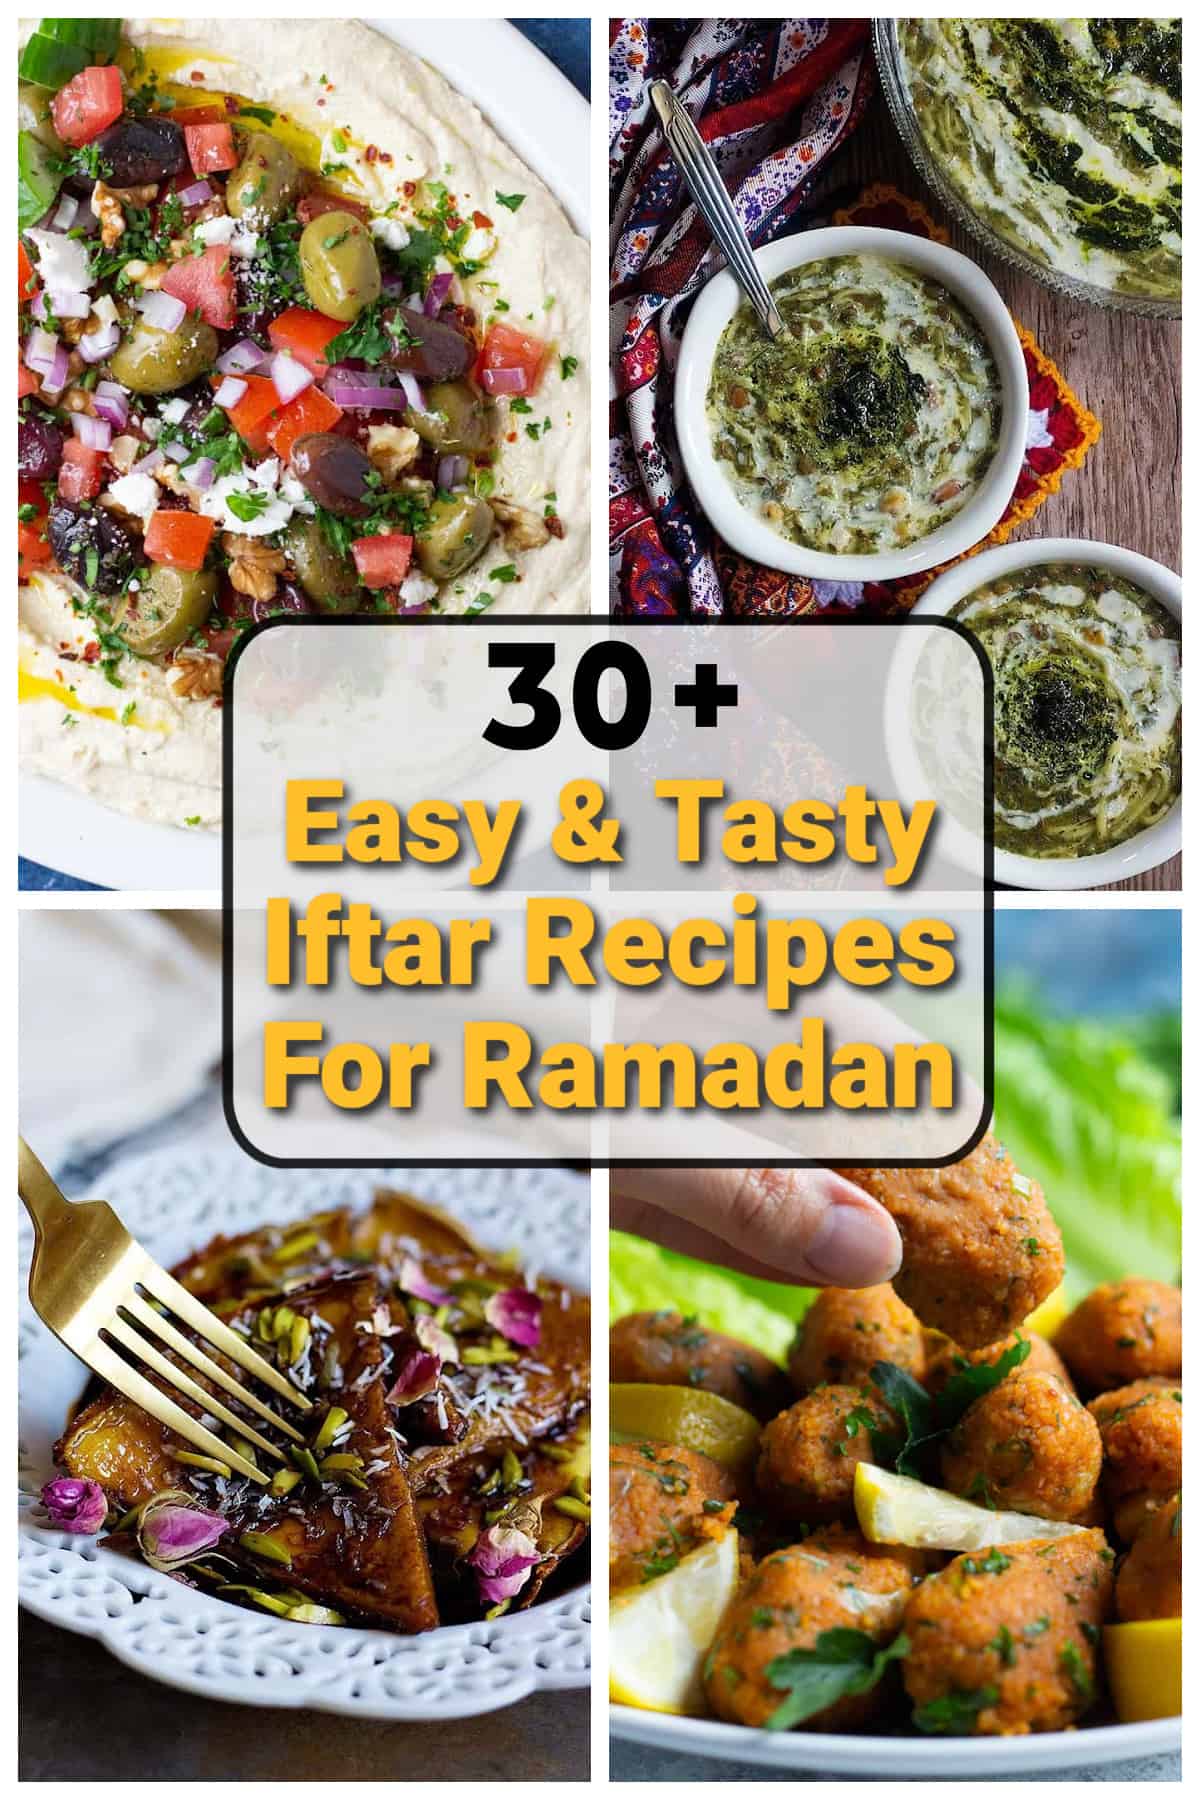 Here is a collection of simple, easy and nutritious Iftar recipes that are made with fresh, seasonal ingredients. It's important to have simple and healthy meals for Iftar after a long day of fasting.